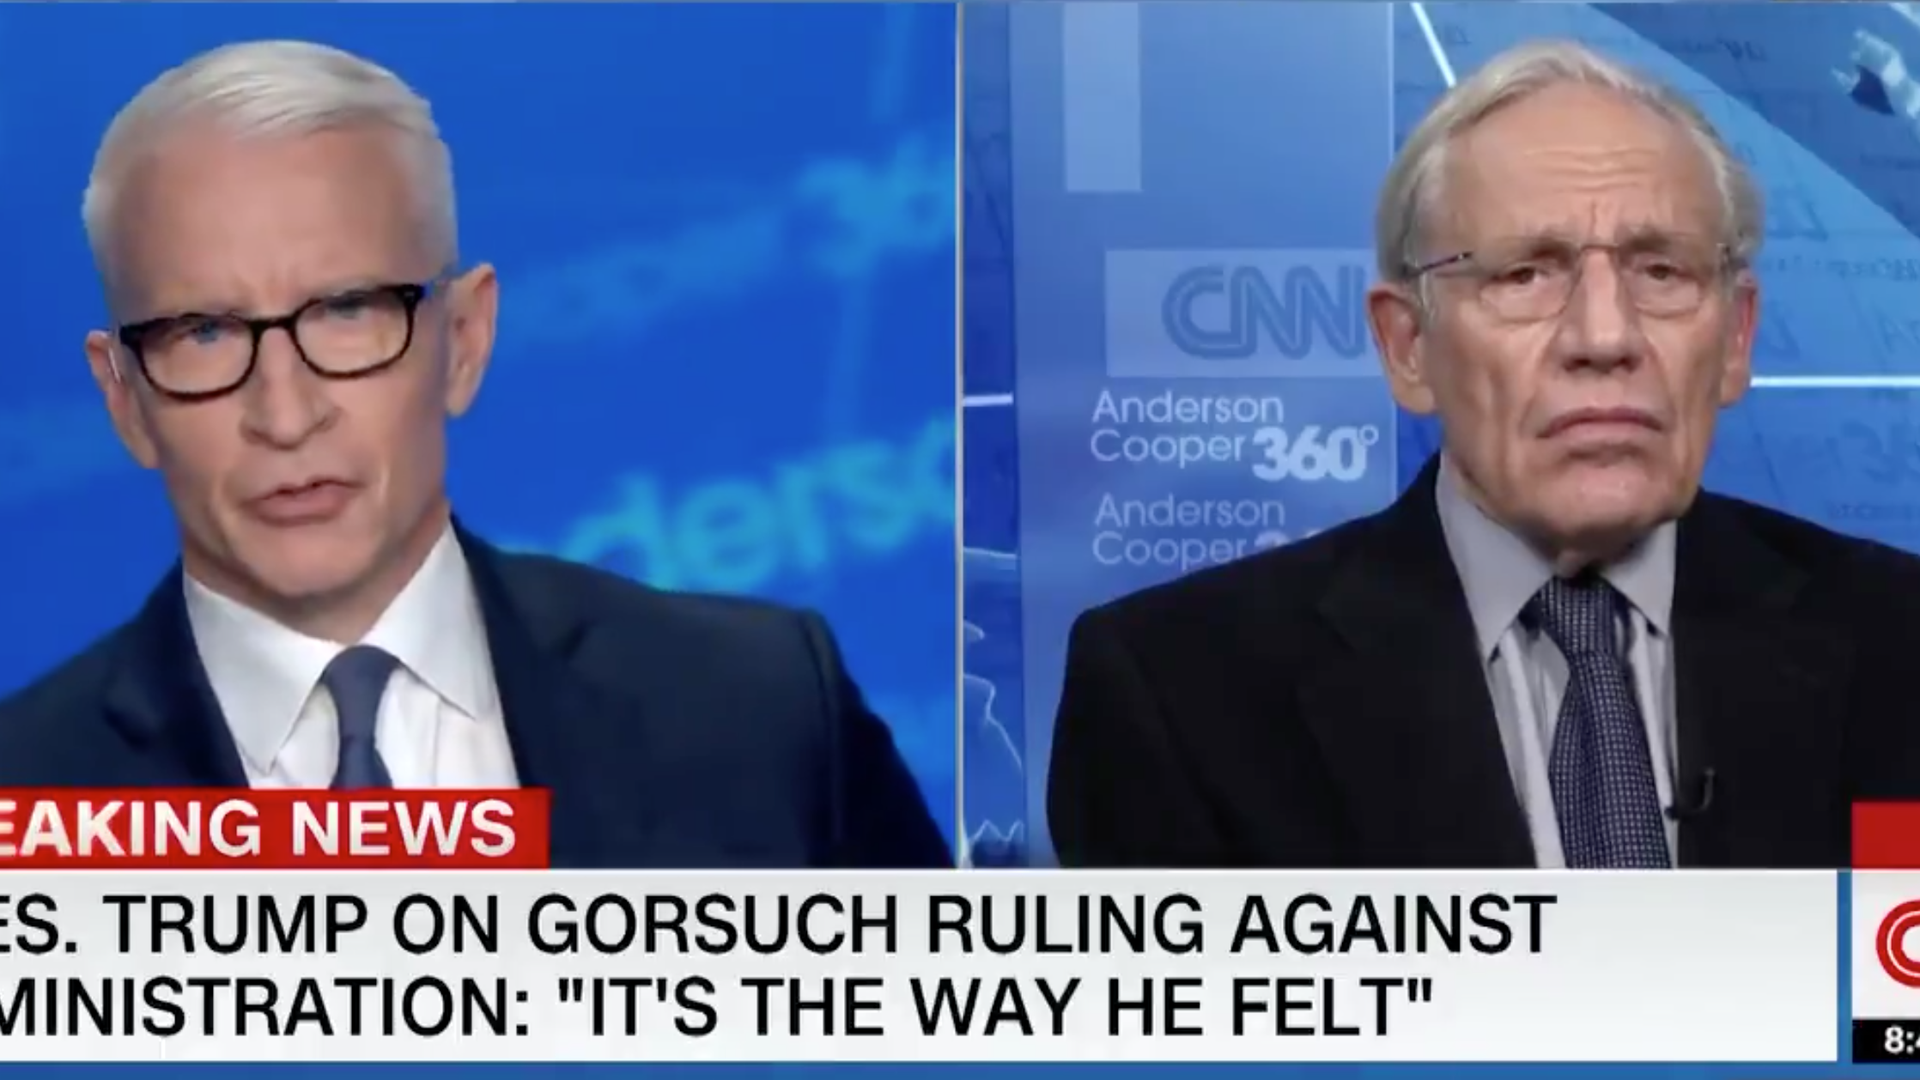 A screenshot of journalists Anderson Cooper and Bob Woodward on CNN.